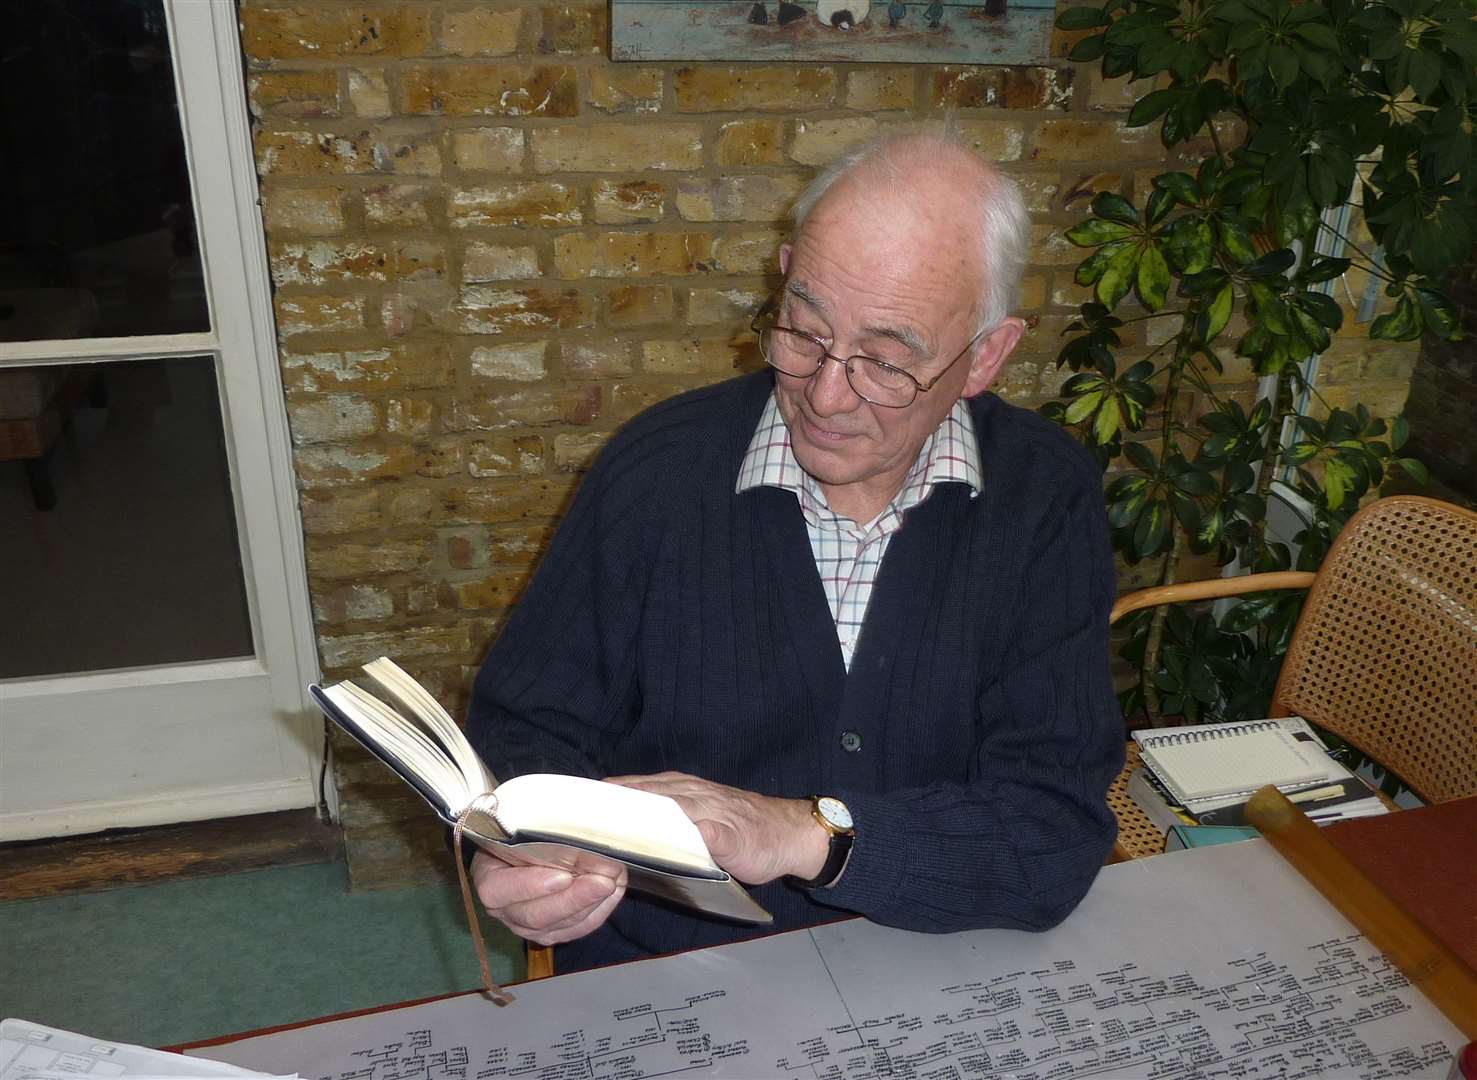 Roddy Tyndale-Biscoe with his replicated copy of the Tyndale Bible and a copy of the Tyndale family tree in 2010